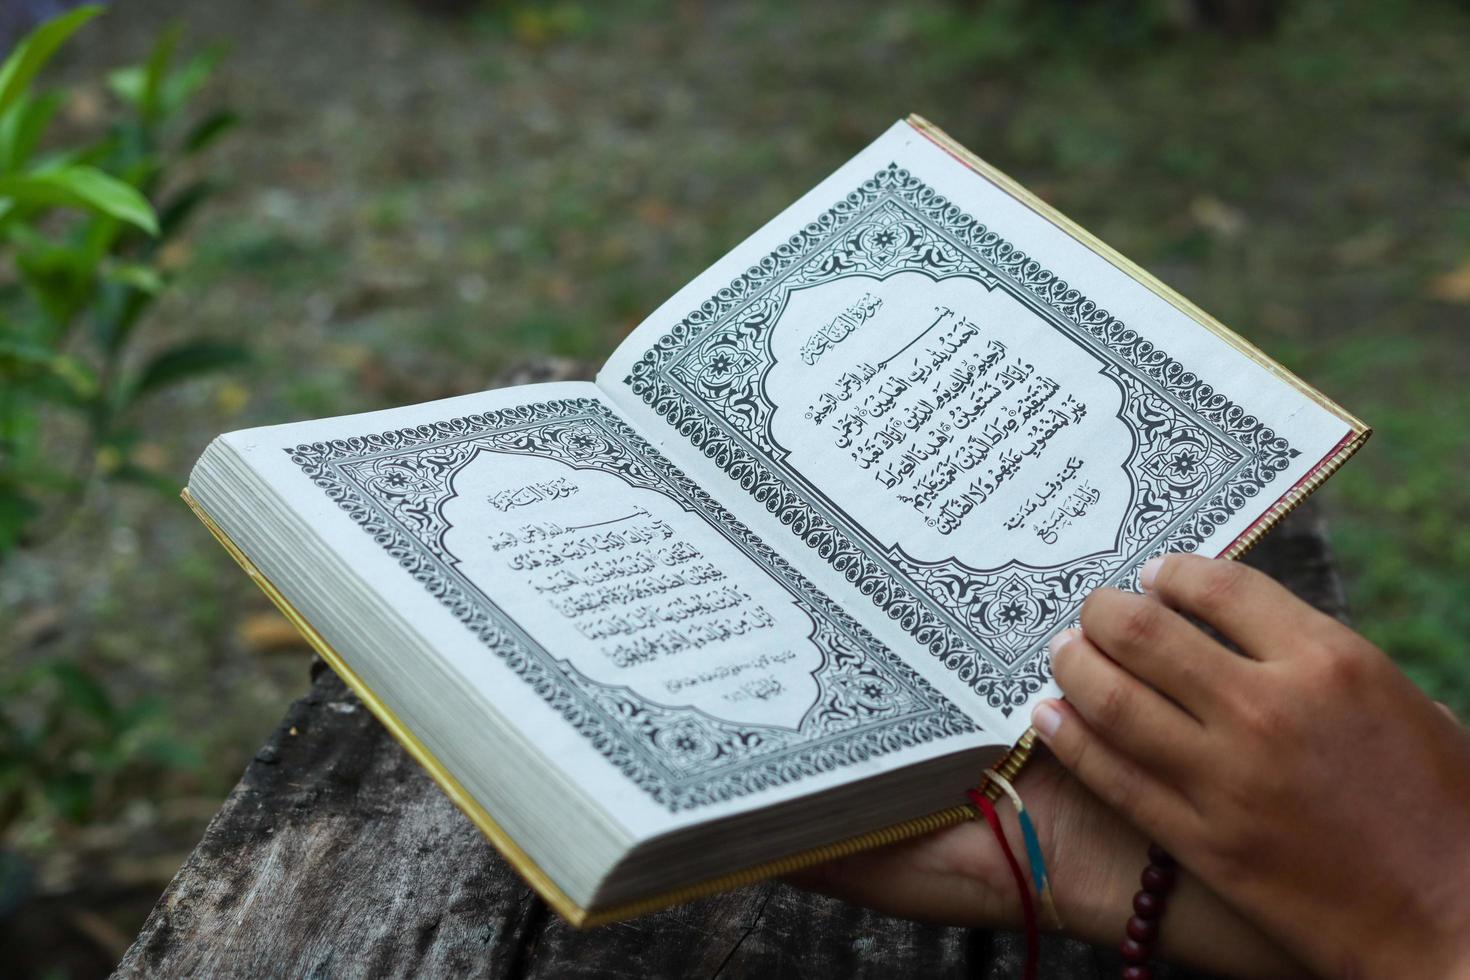 The Noble Quran photo